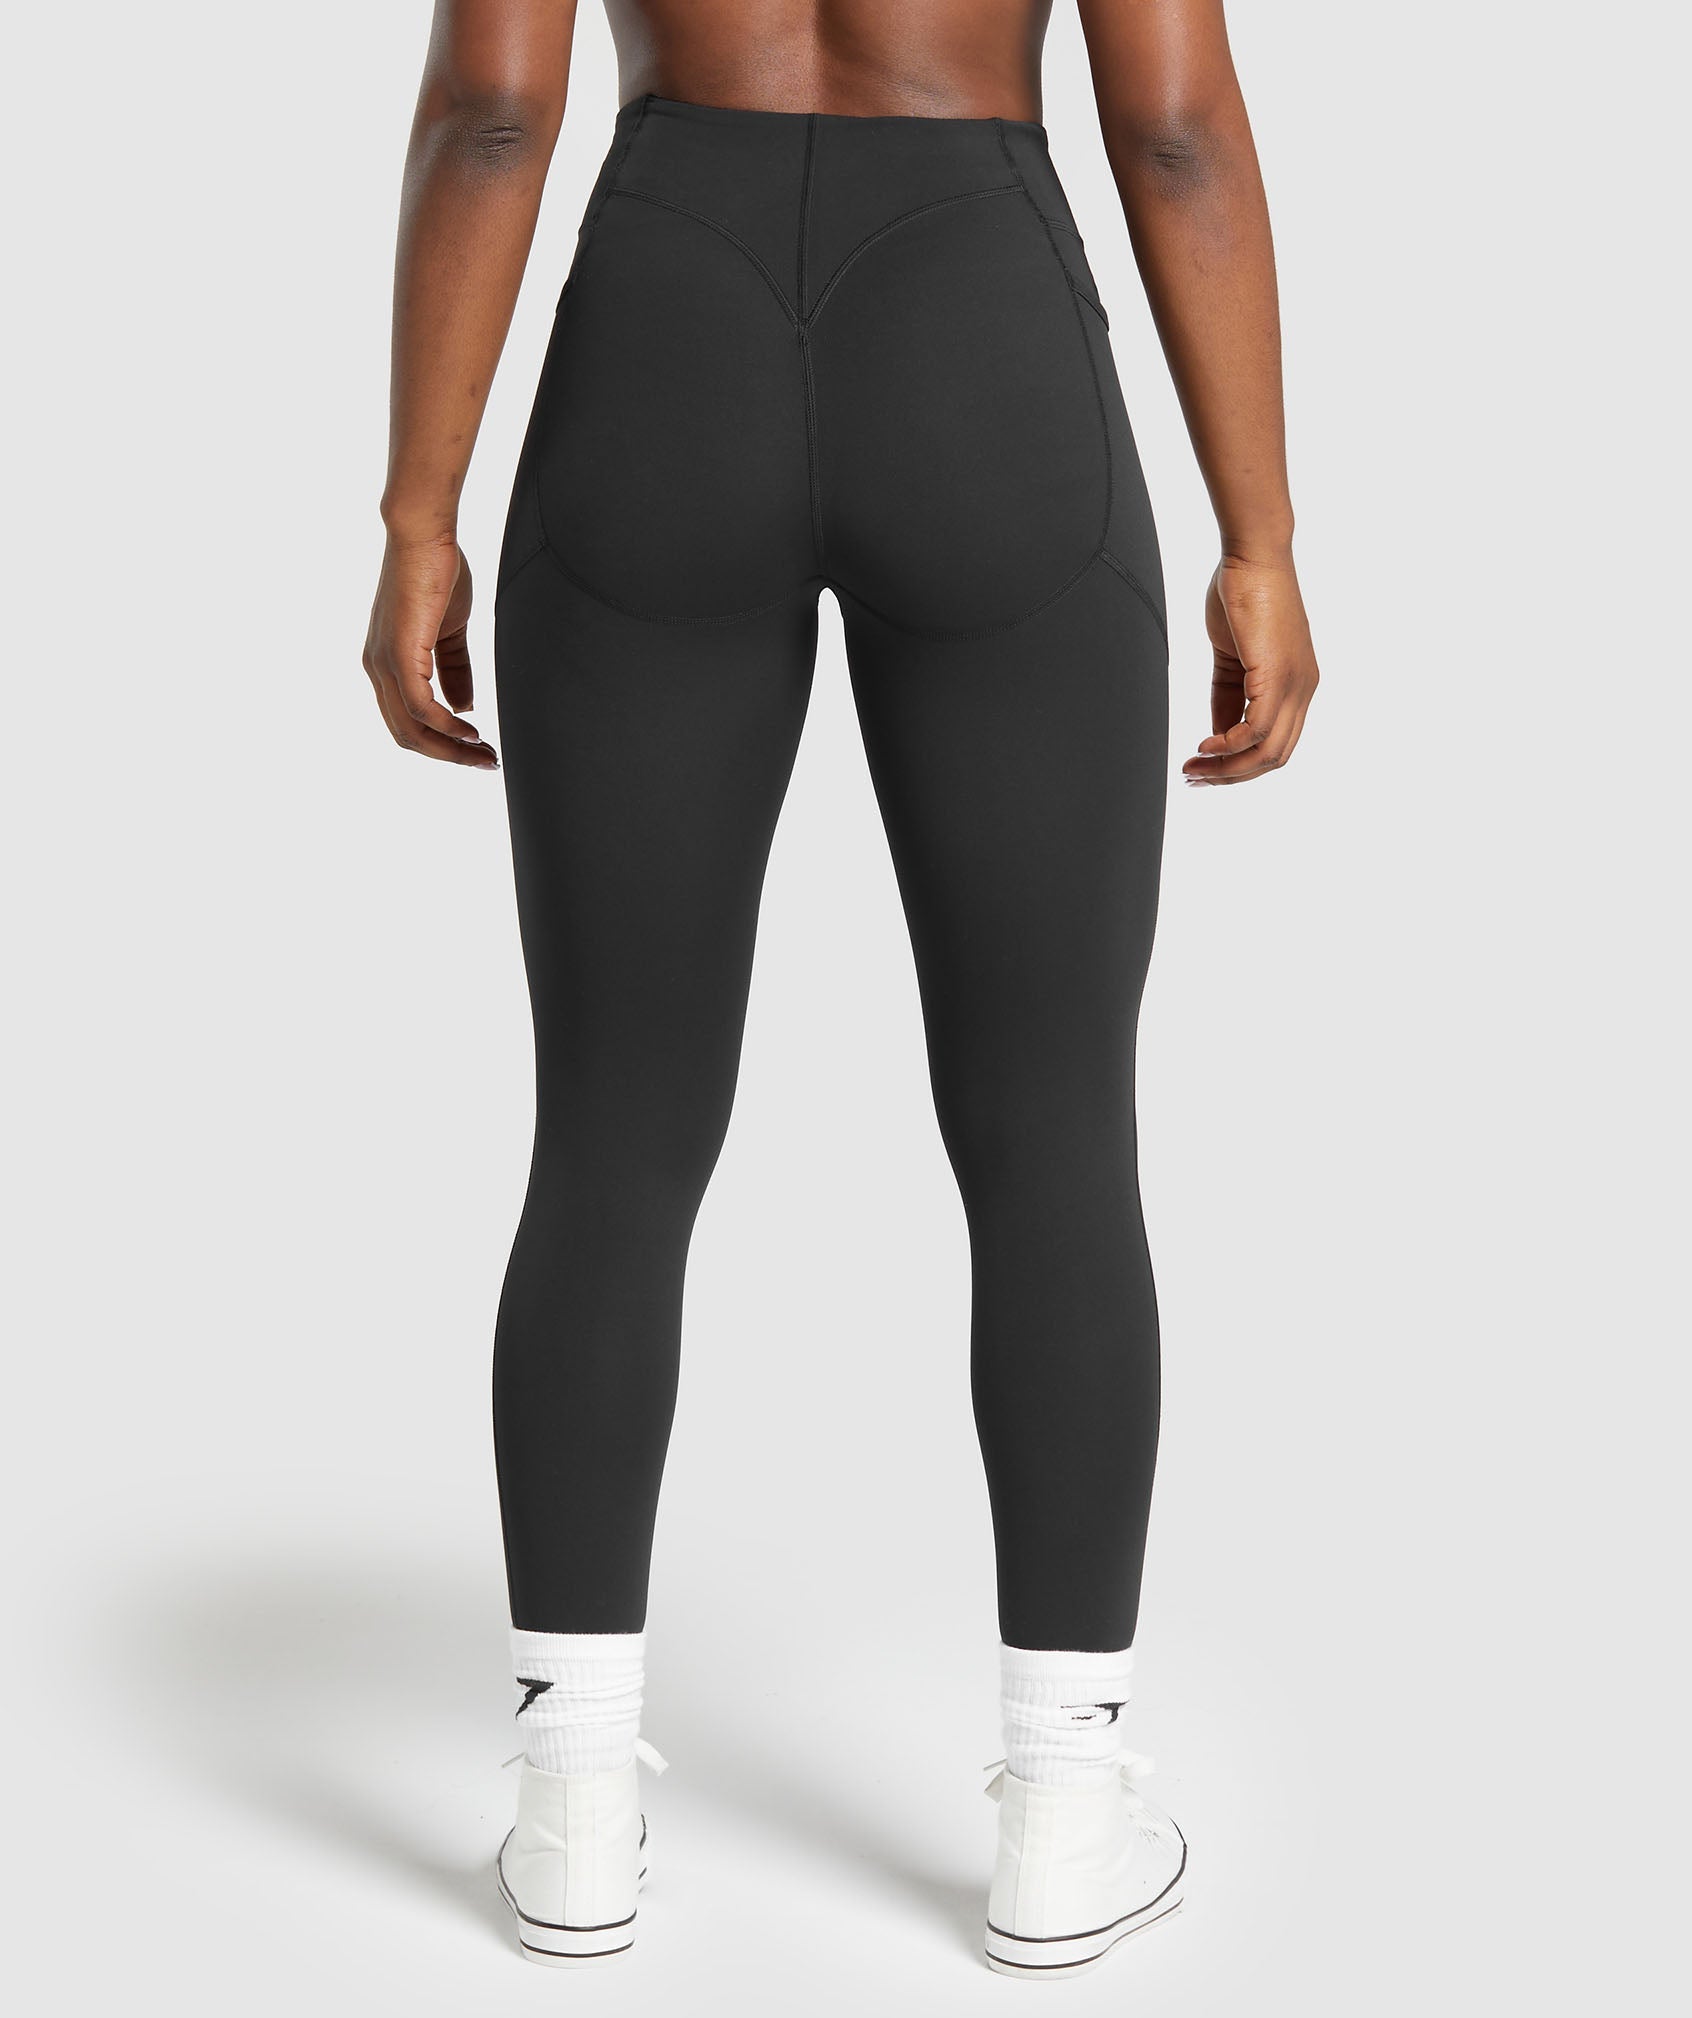 A new era of Flex. The High Waisted Flex Leggings combine the signature  sculpting and seamless knit of t…